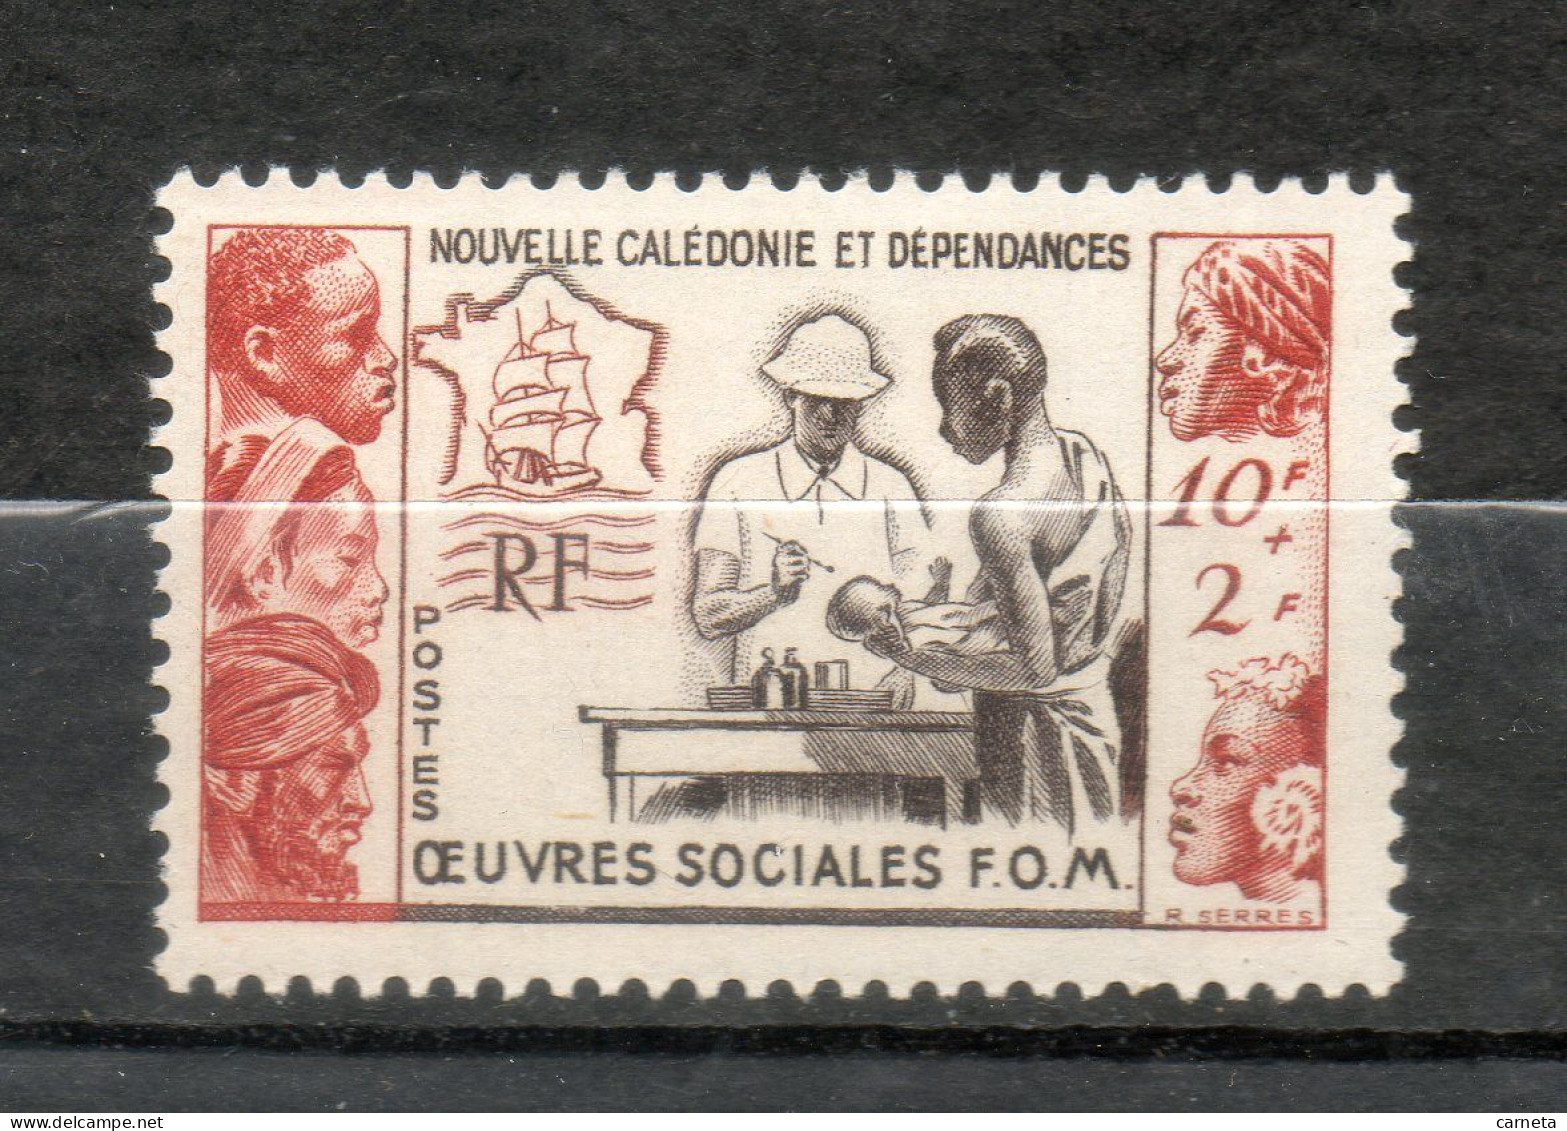 Nlle CALEDONIE N° 278   NEUF AVEC CHARNIERE COTE  9.50€    OEUVRES SOCIALES - Nuevos